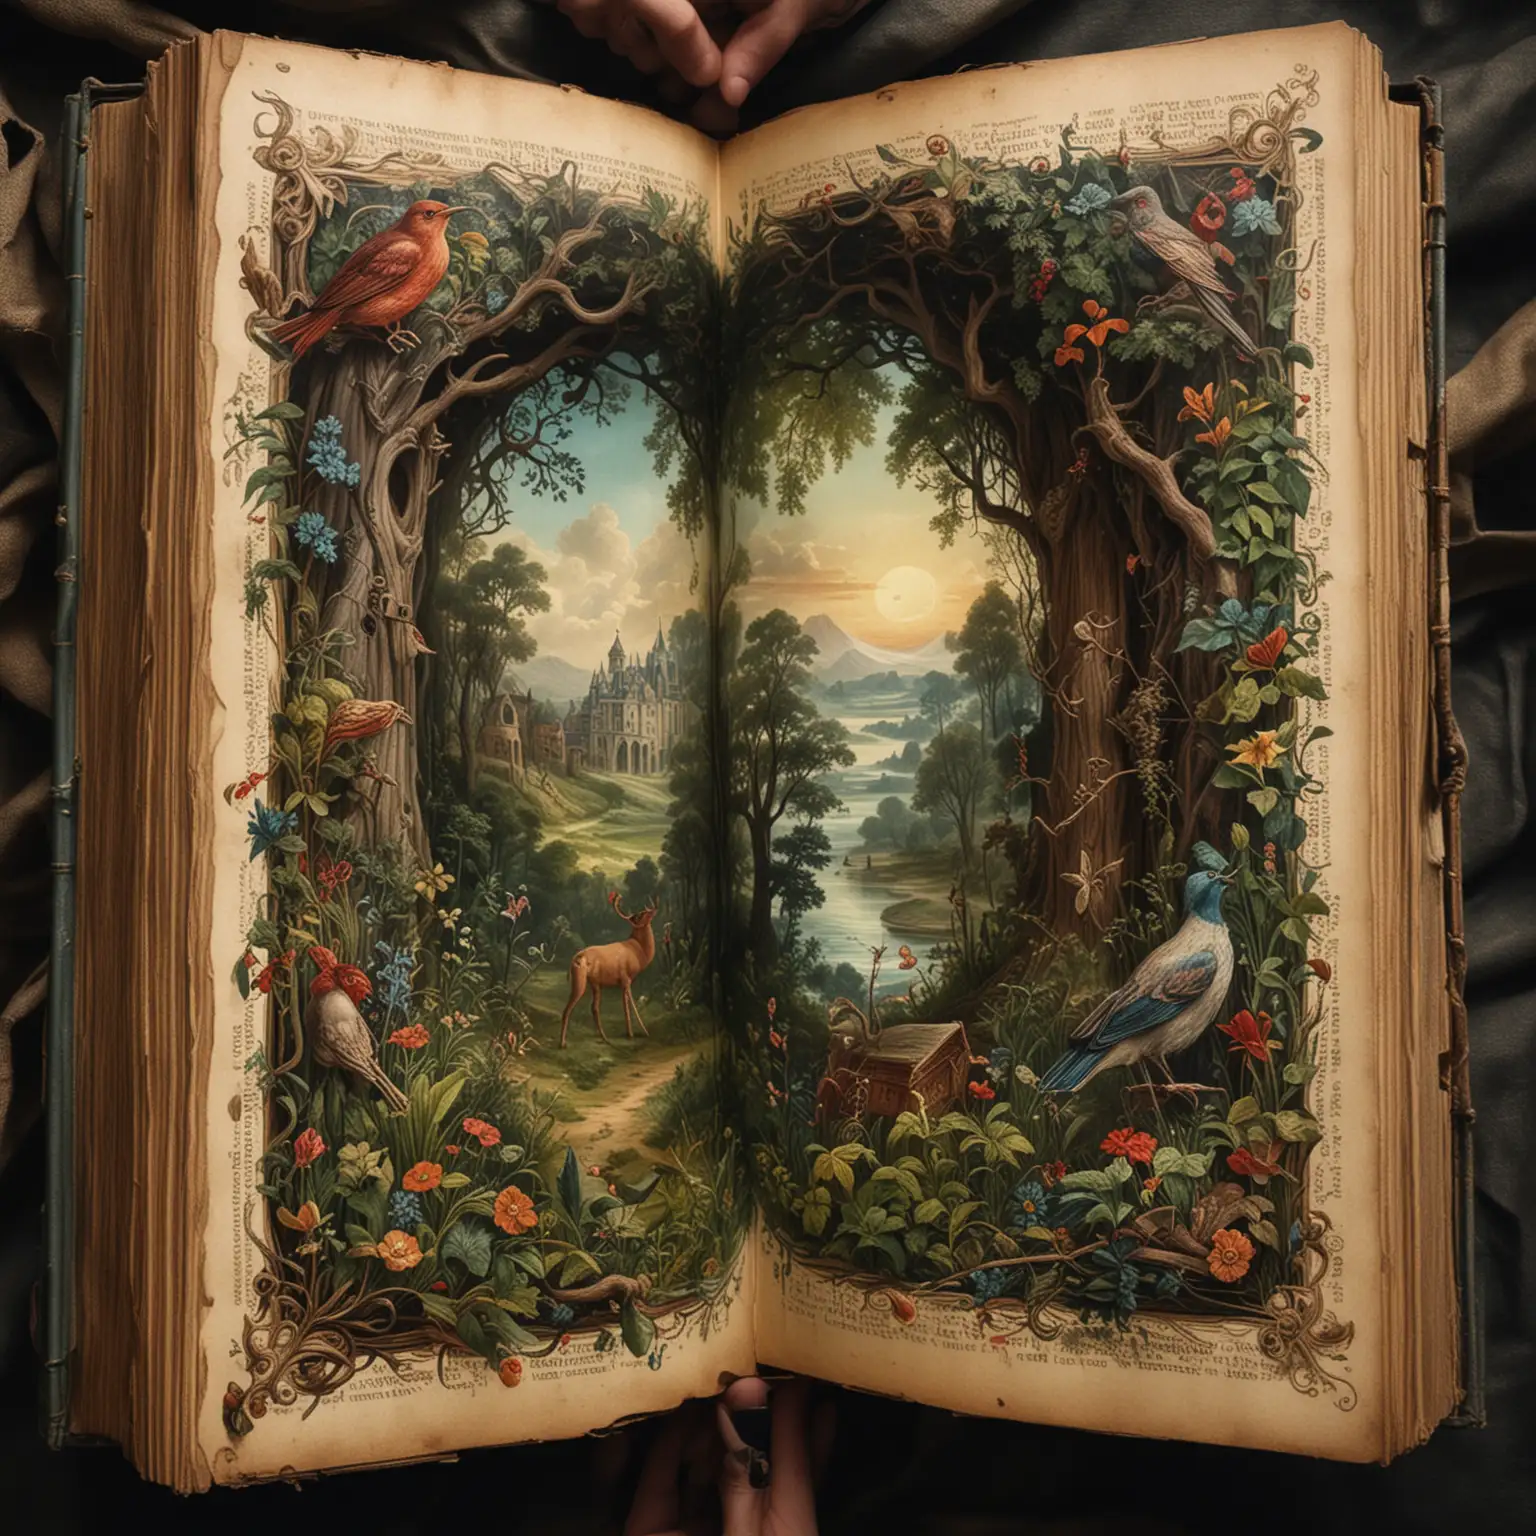 A beautiful photo of an open old Victorian-era book, full of legends and myths. The book contains ancient stories of secrets and adventures, being a portal to a world where history mixes with fantasy, creating extraordinary stories with beautiful painted illustrations.